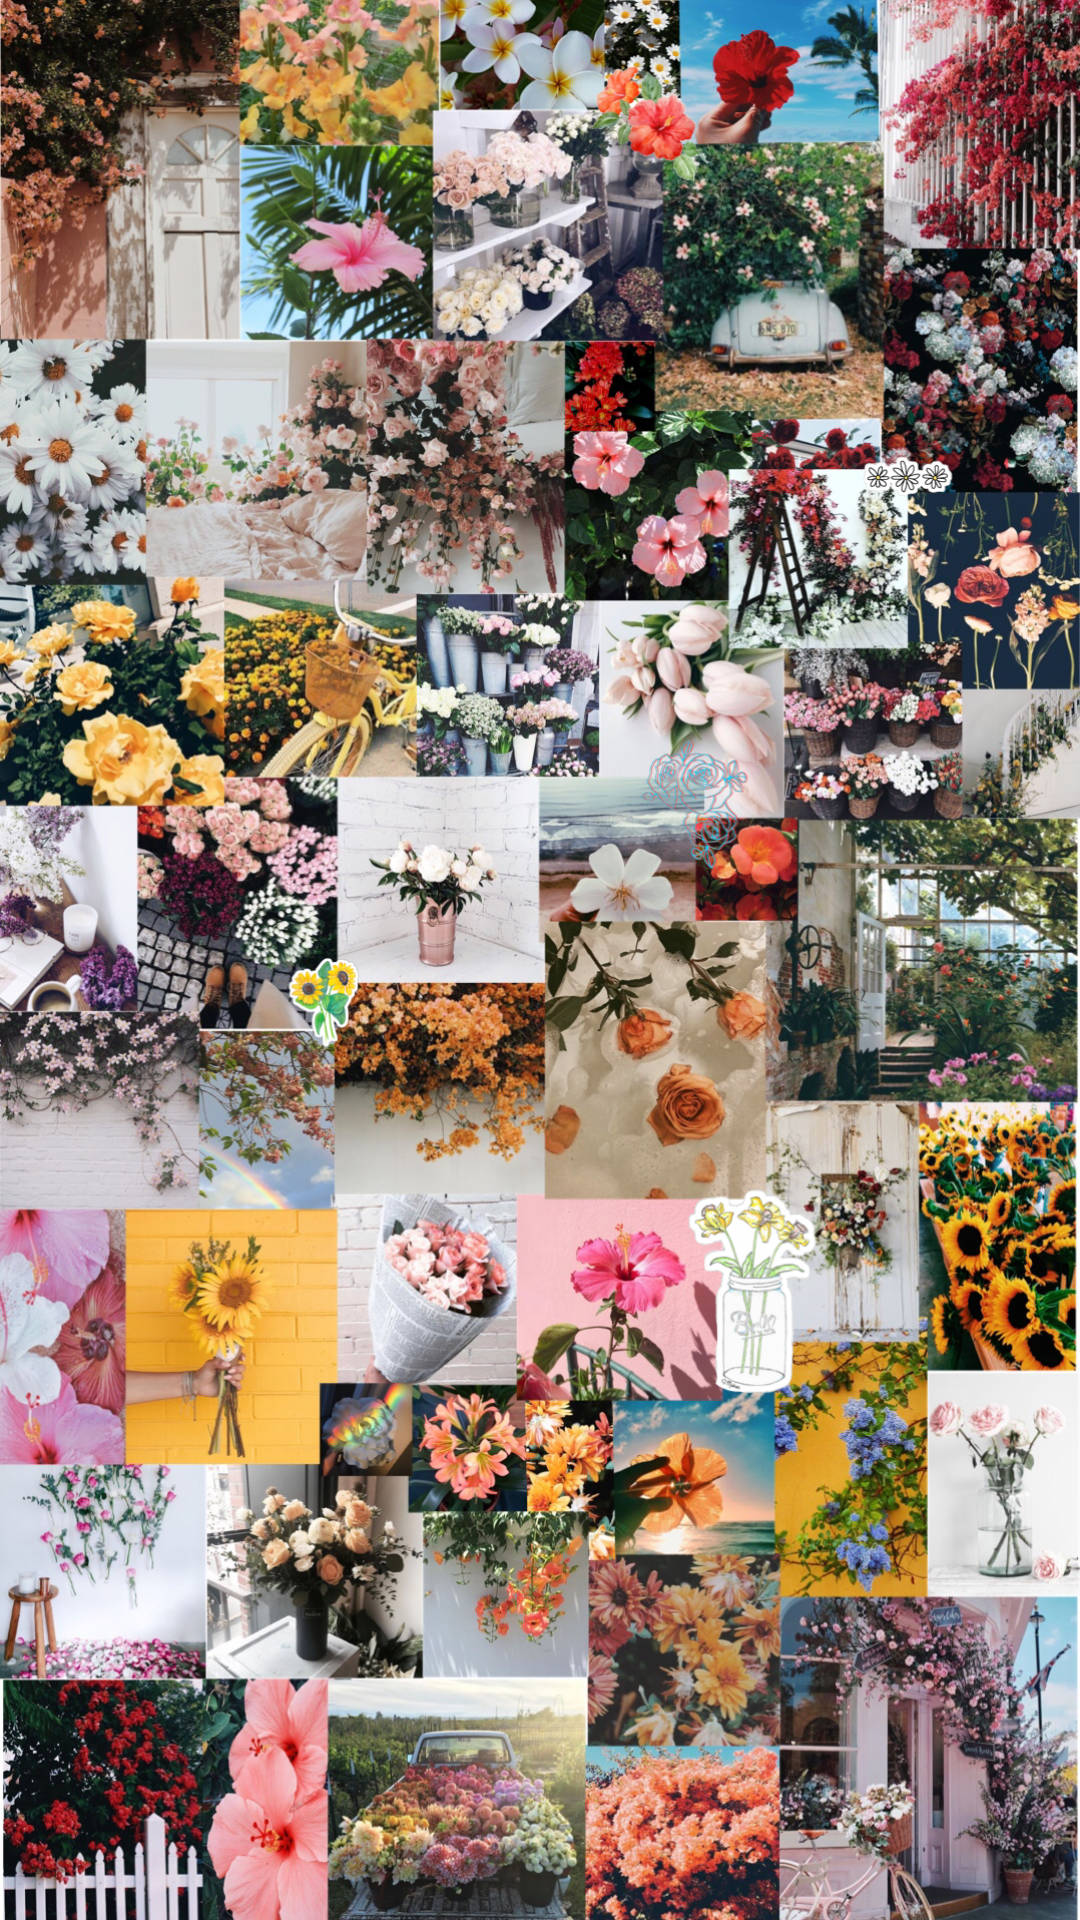 Aesthetic Floral Display On Iphone Screen Wallpaper